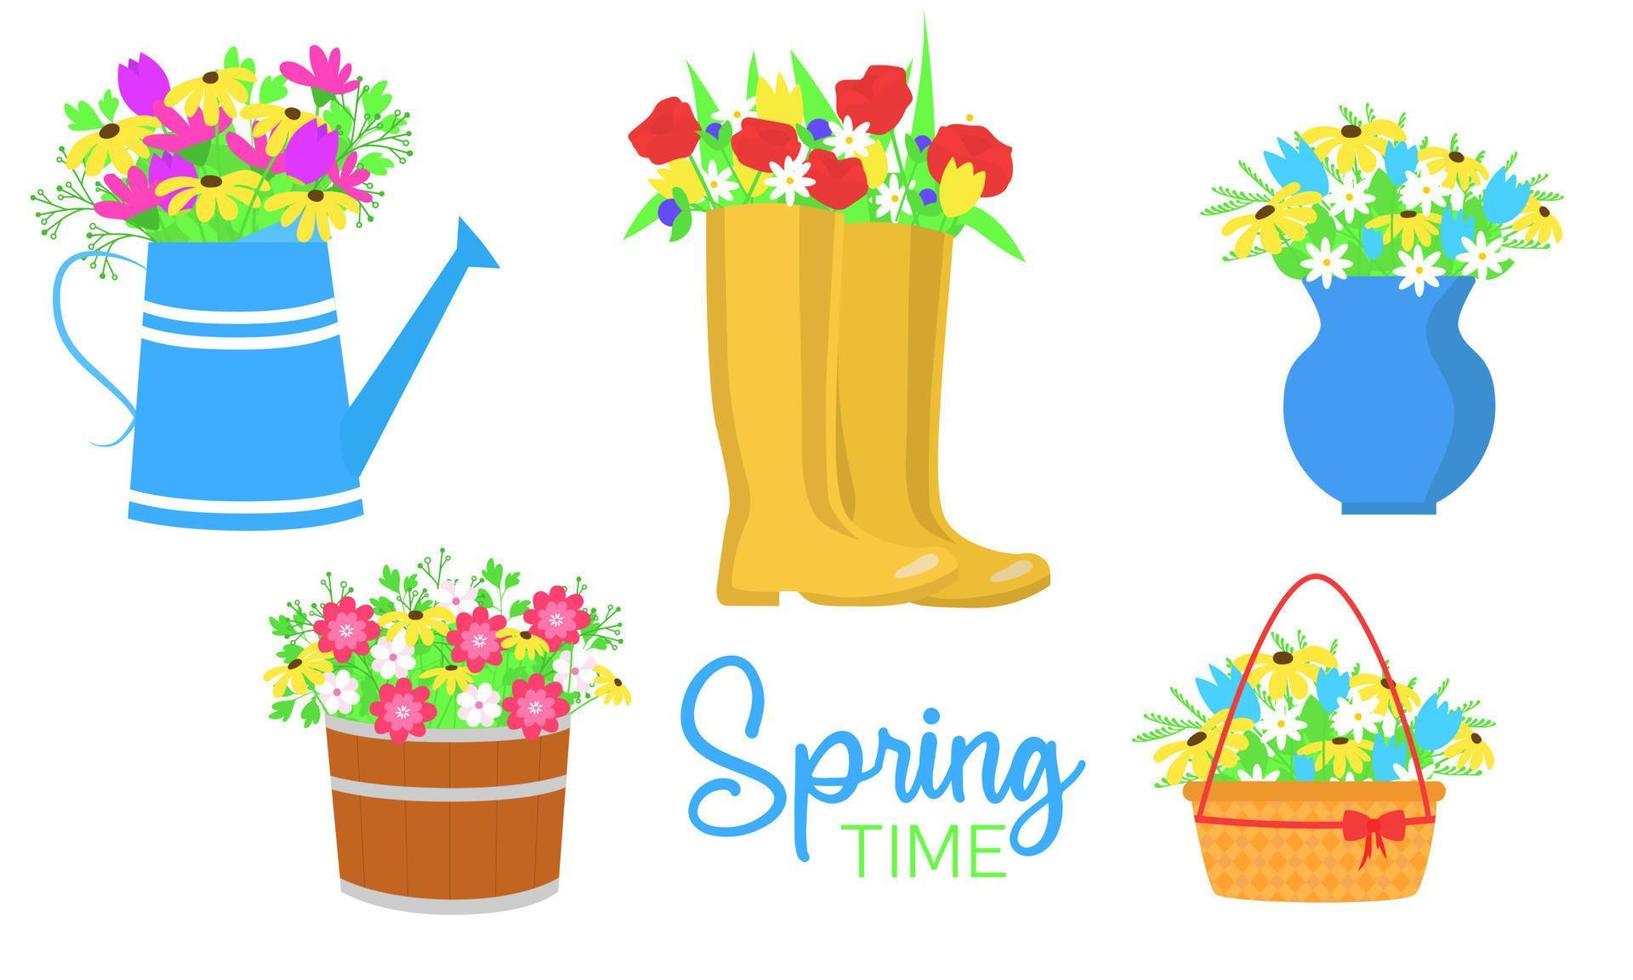 Collection of spring or summer flowers clip art. Bouquet of flowers in yellow boots, blue vase, pot and basket. Vector illustration.